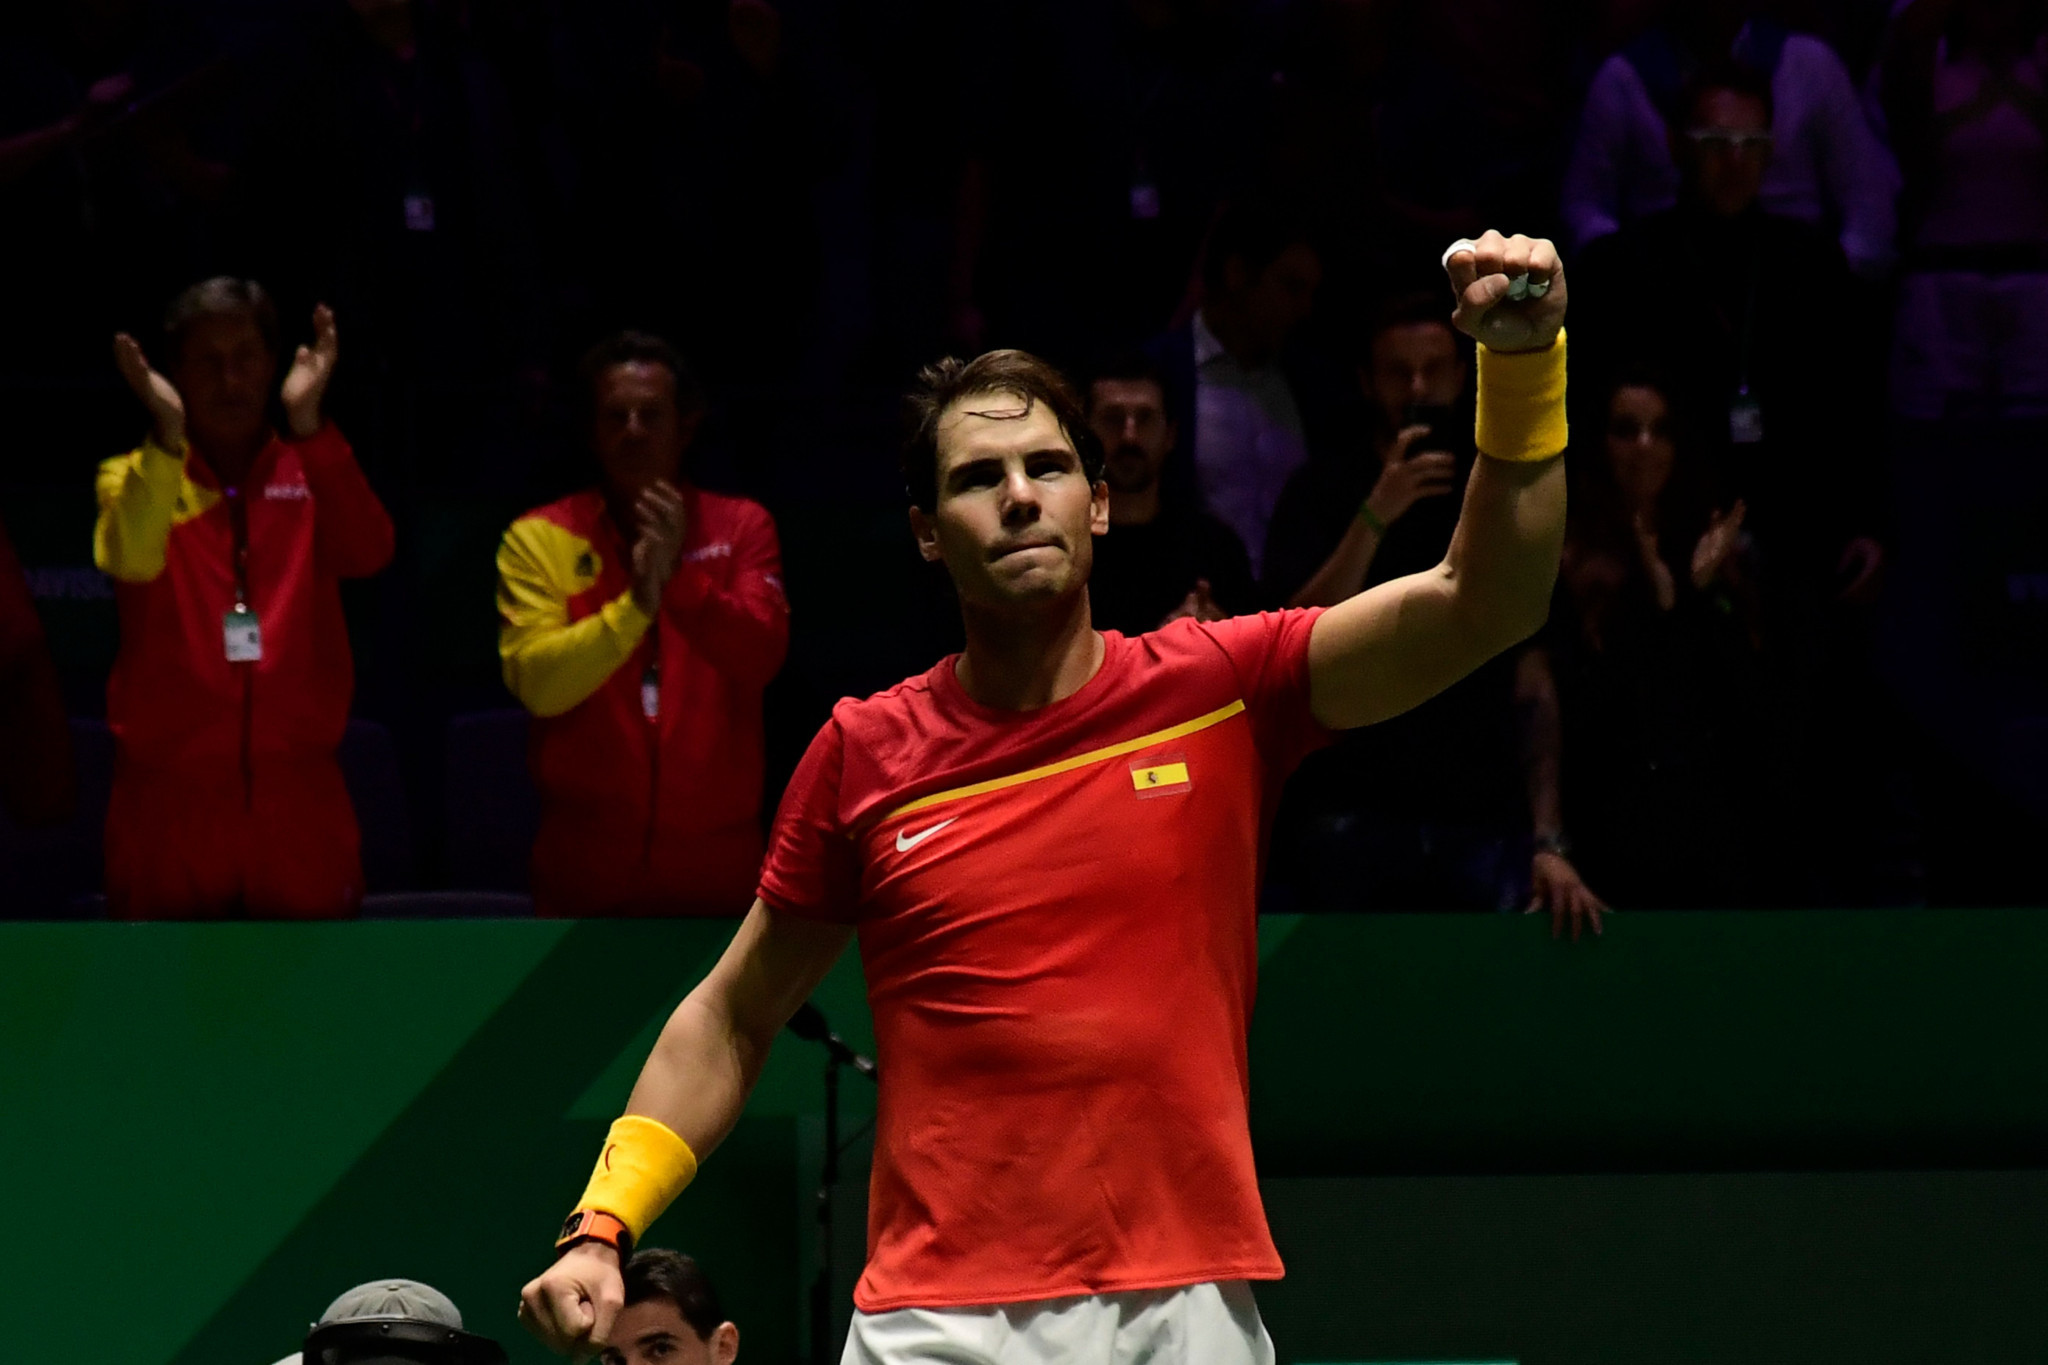 Croatia's Davis Cup reign ended by hosts Spain